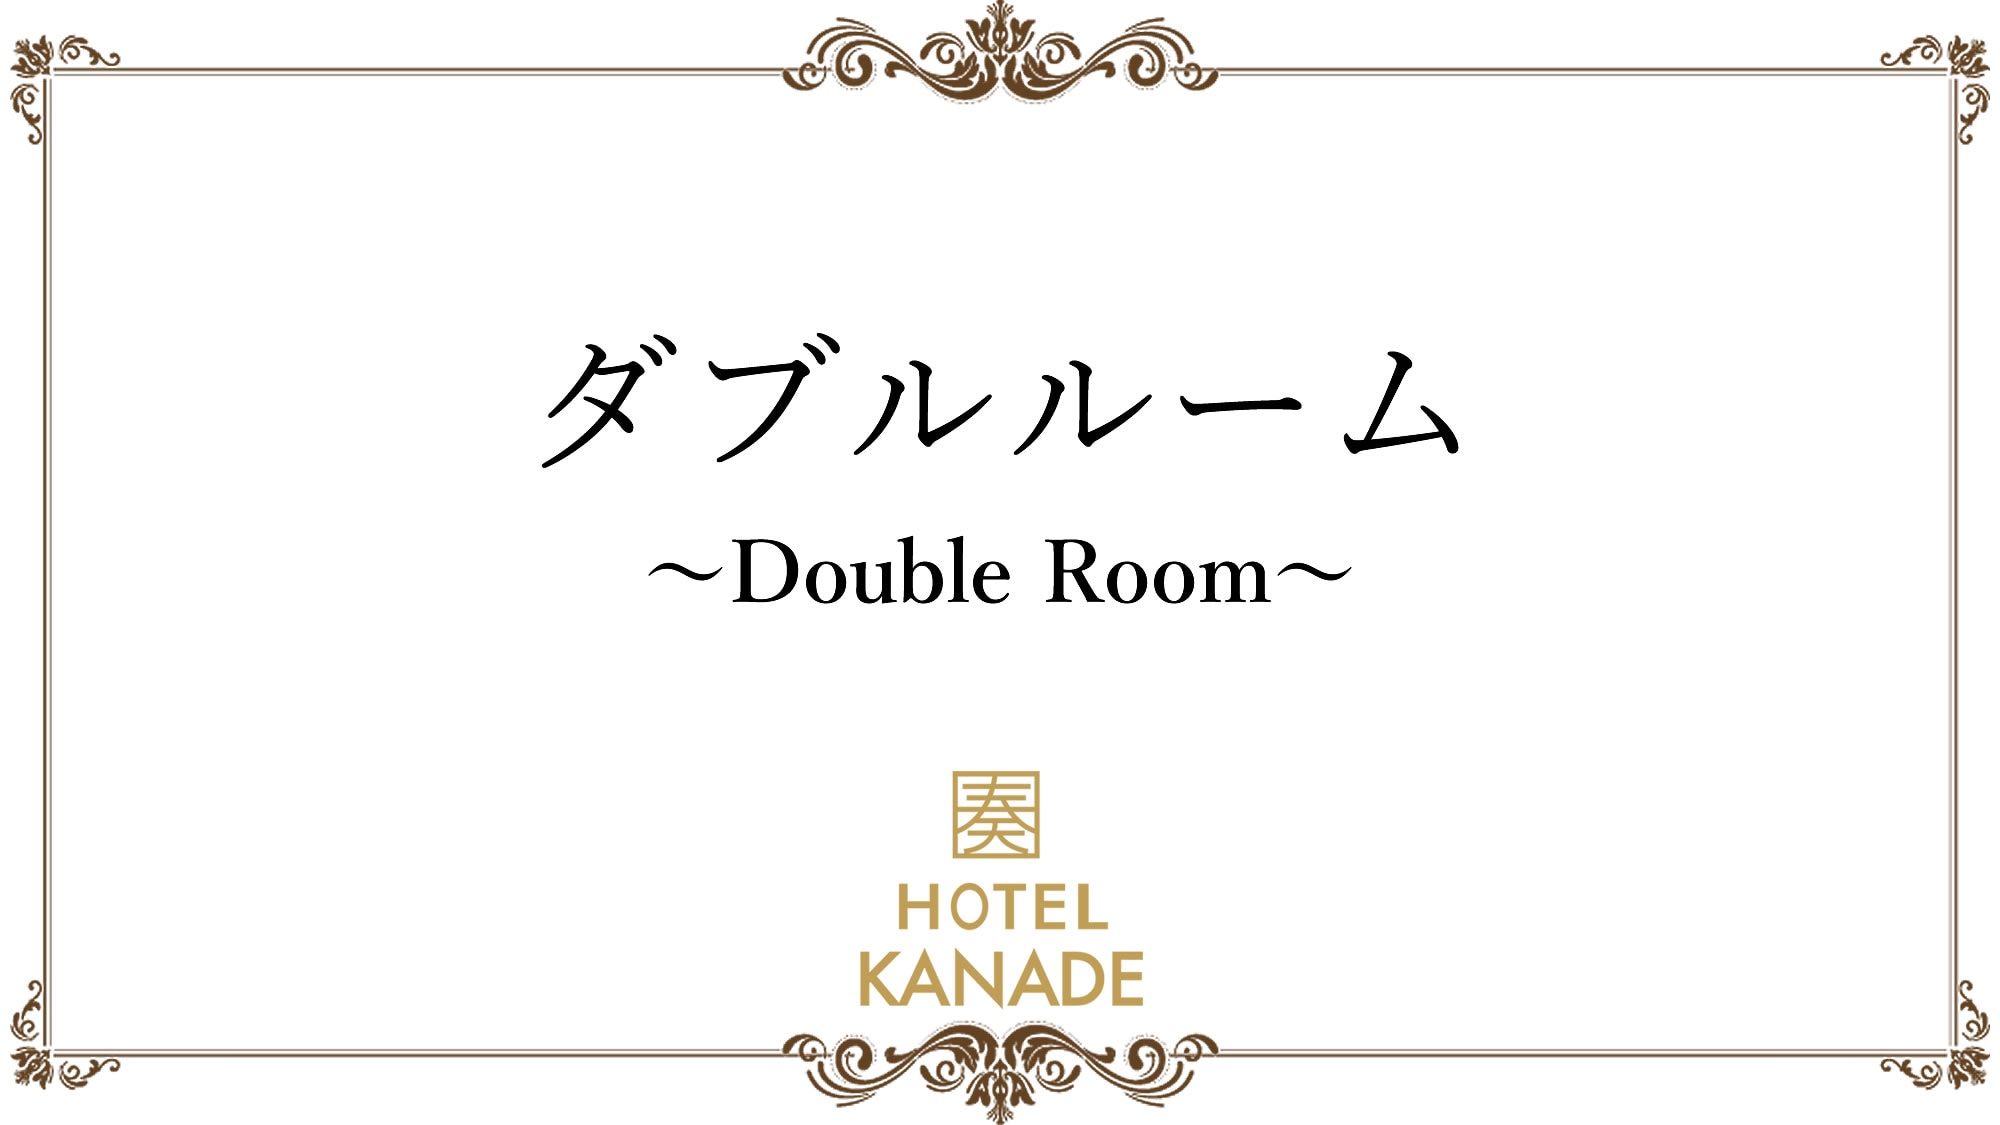 A double room